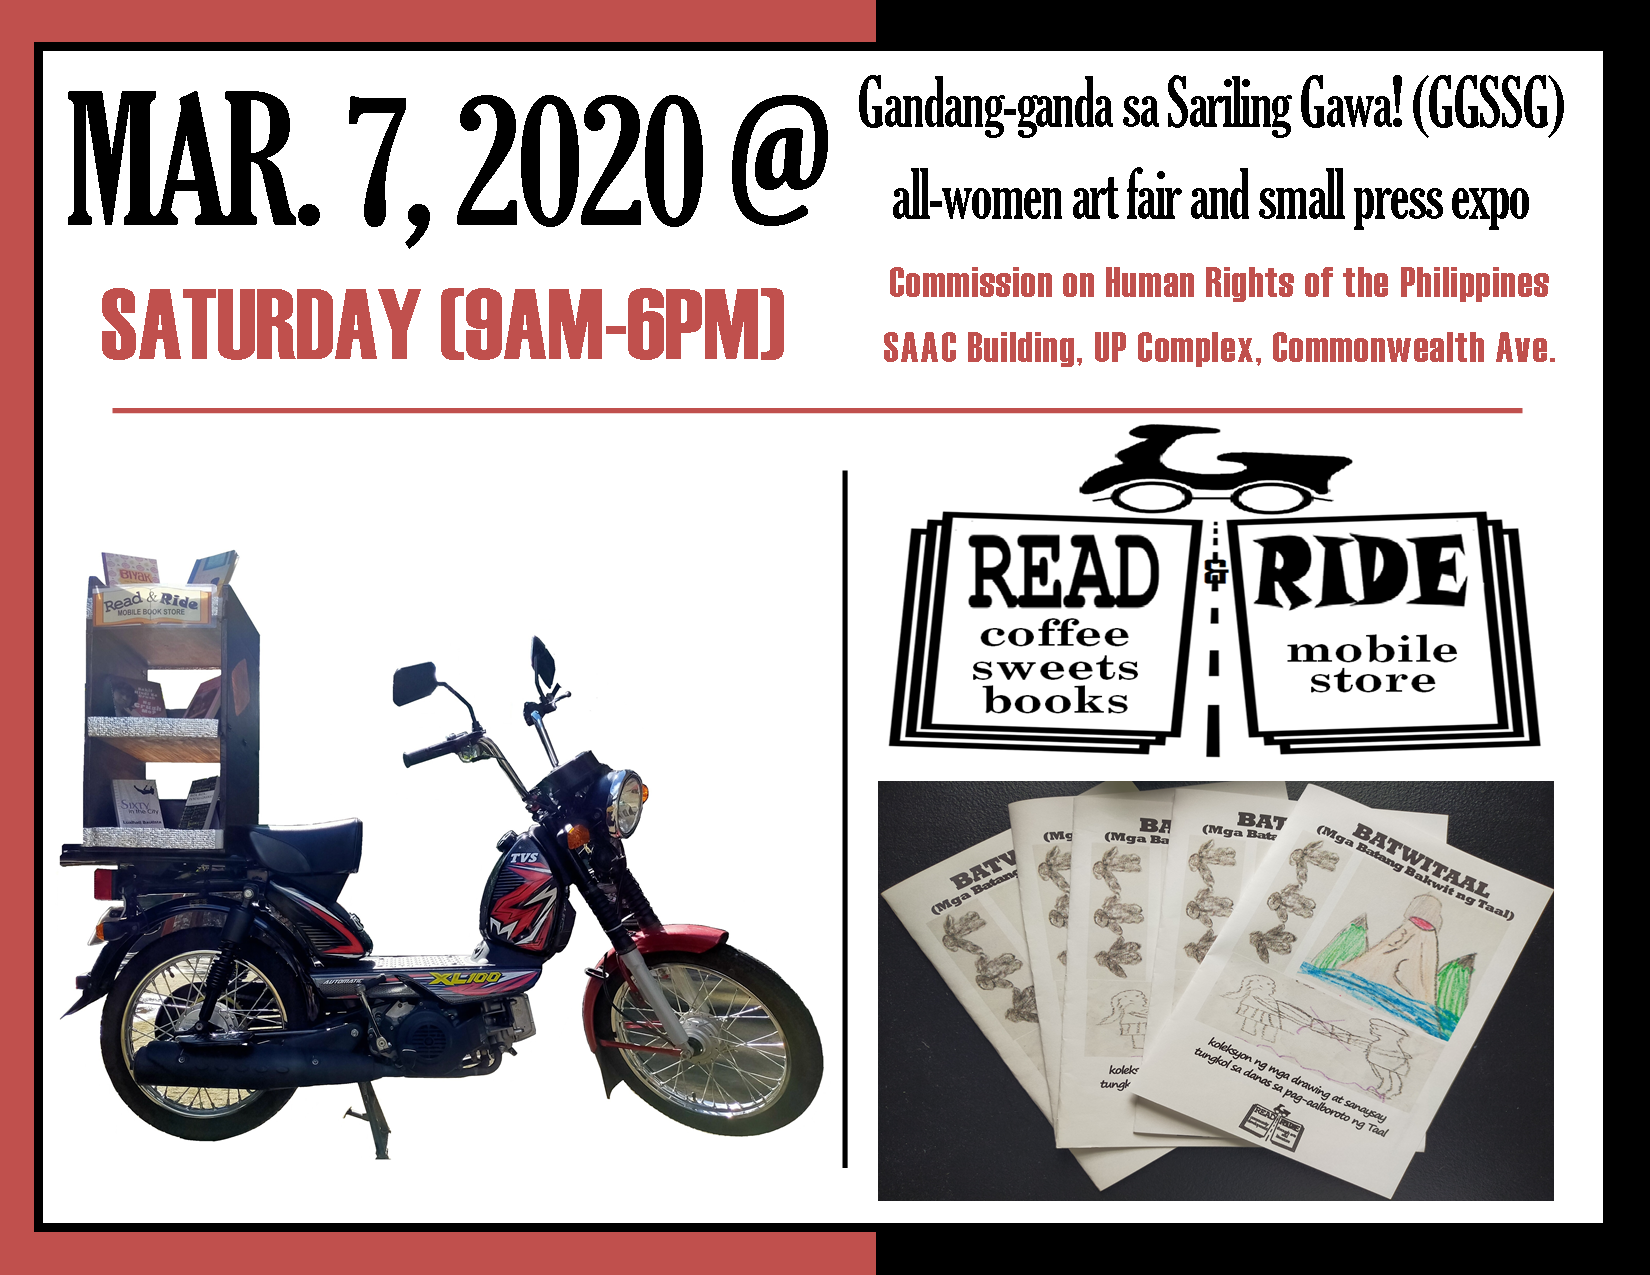 read and ride cafe GGSSG